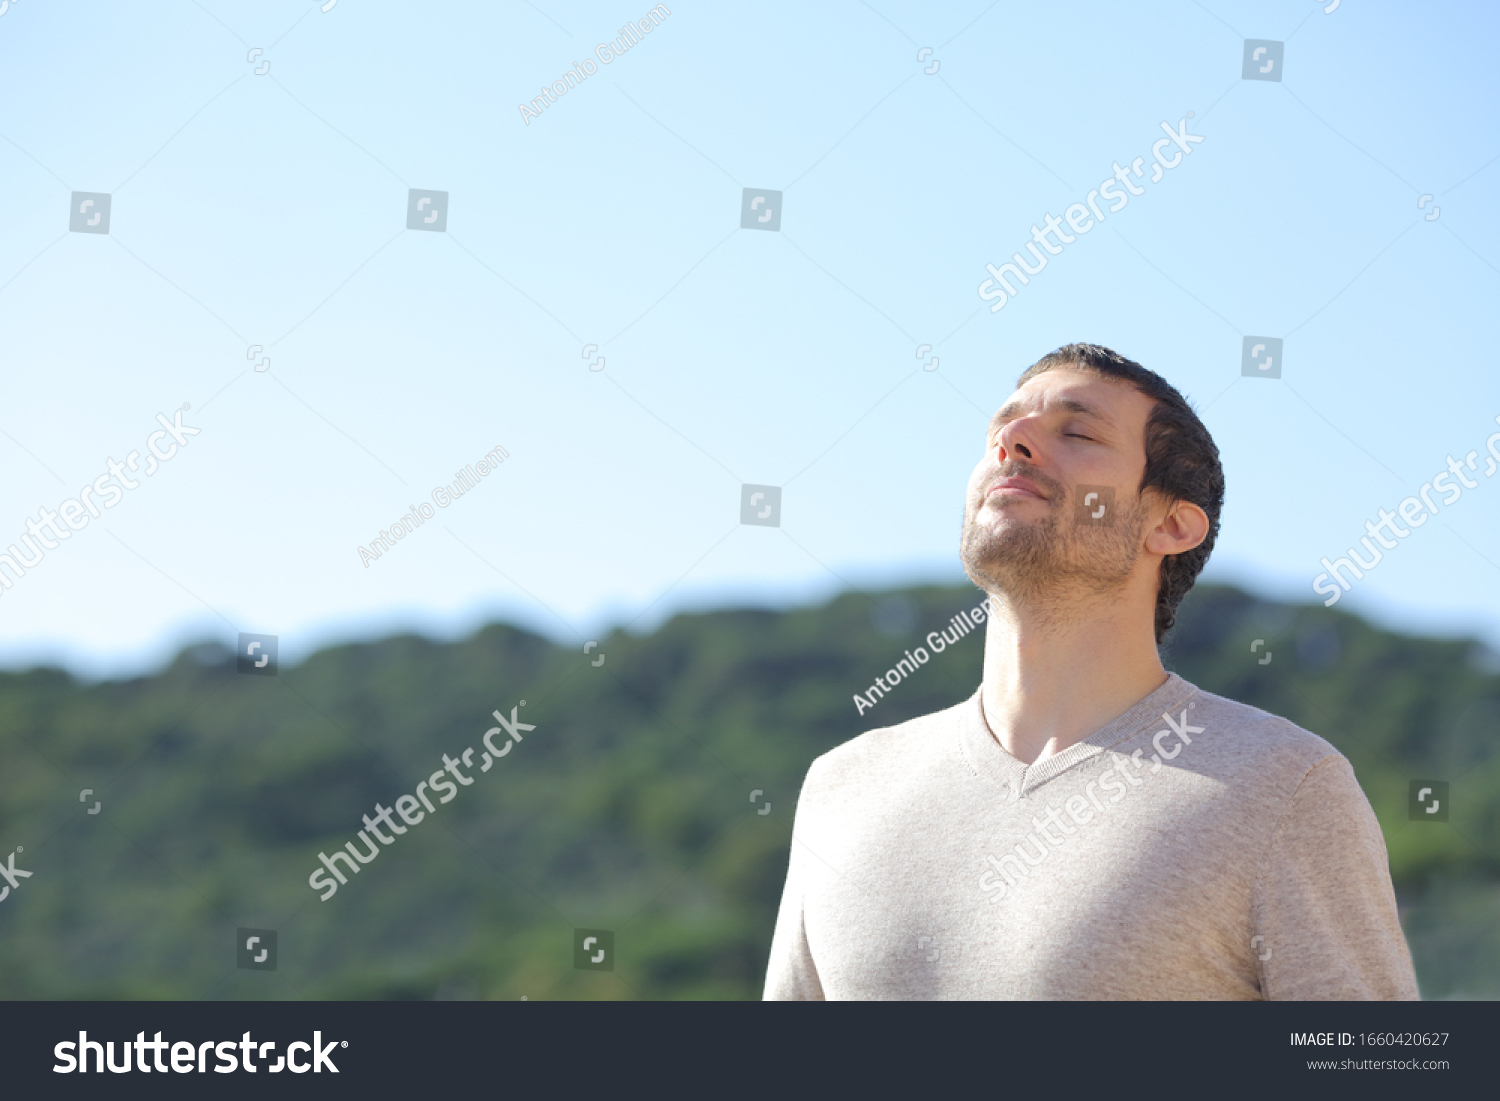 Relaxed man breathing fresh air near the mountains with a blue sky in the background #1660420627